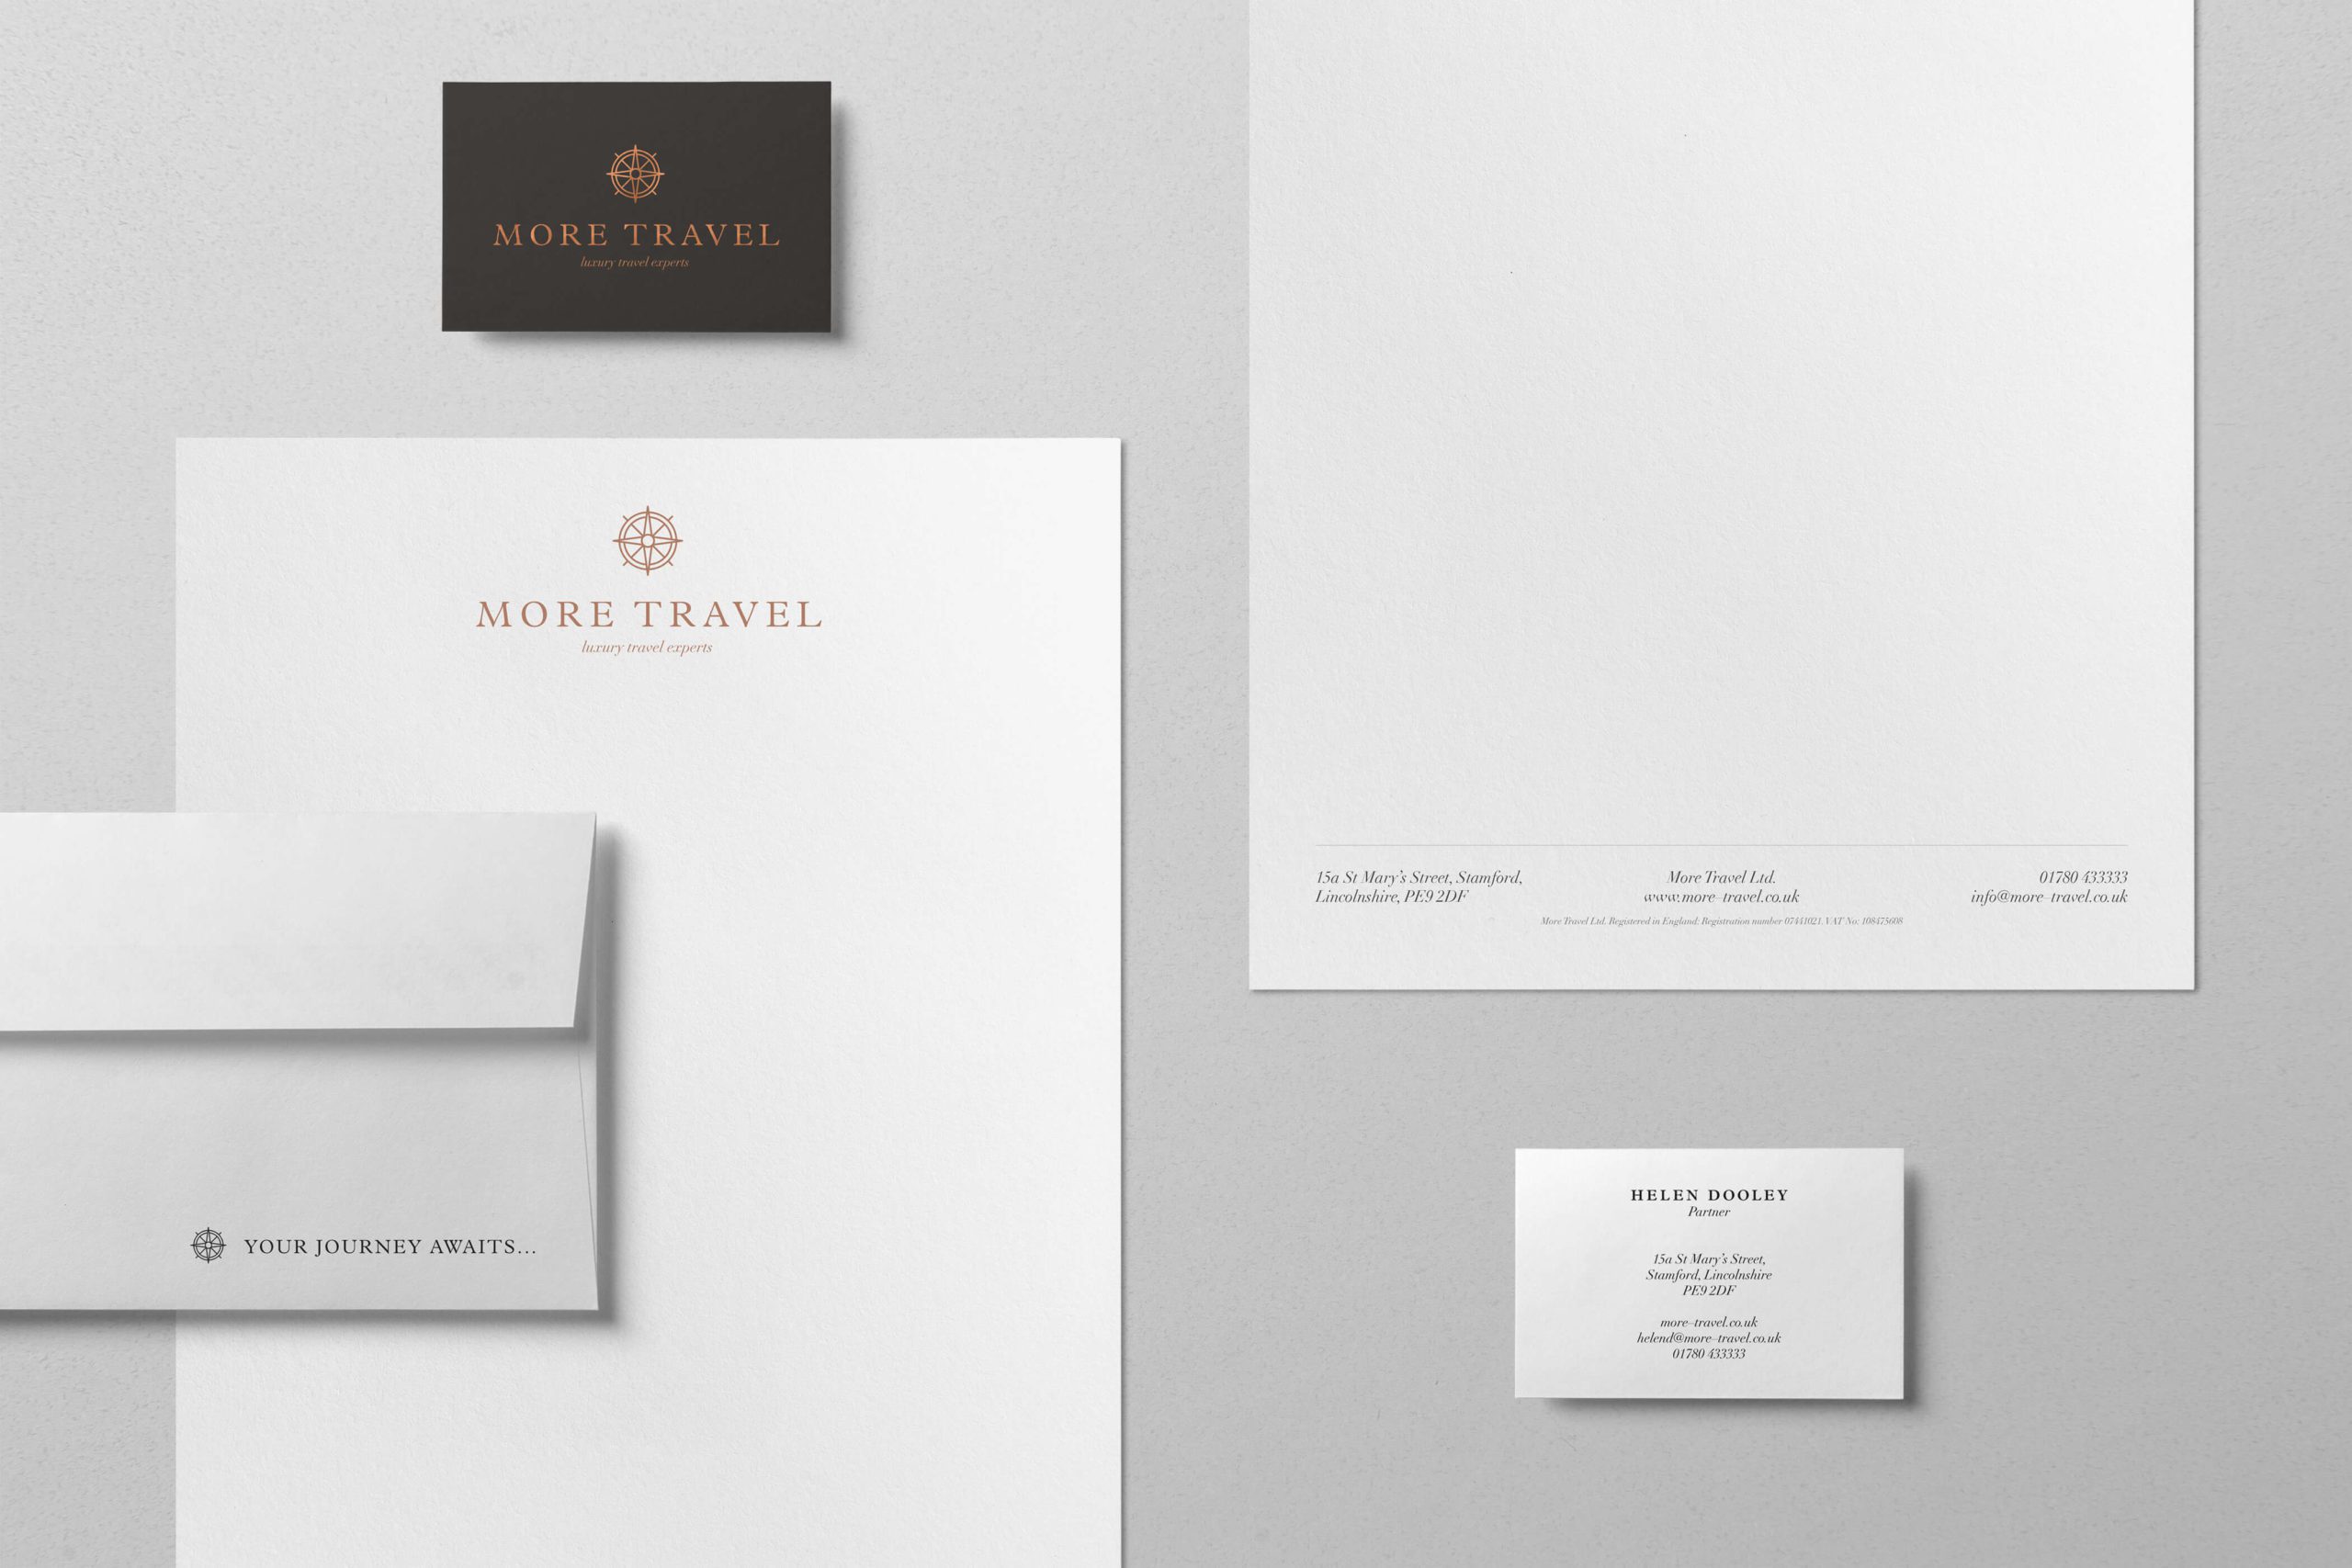 Brand stationery design for luxury travel company, More travel